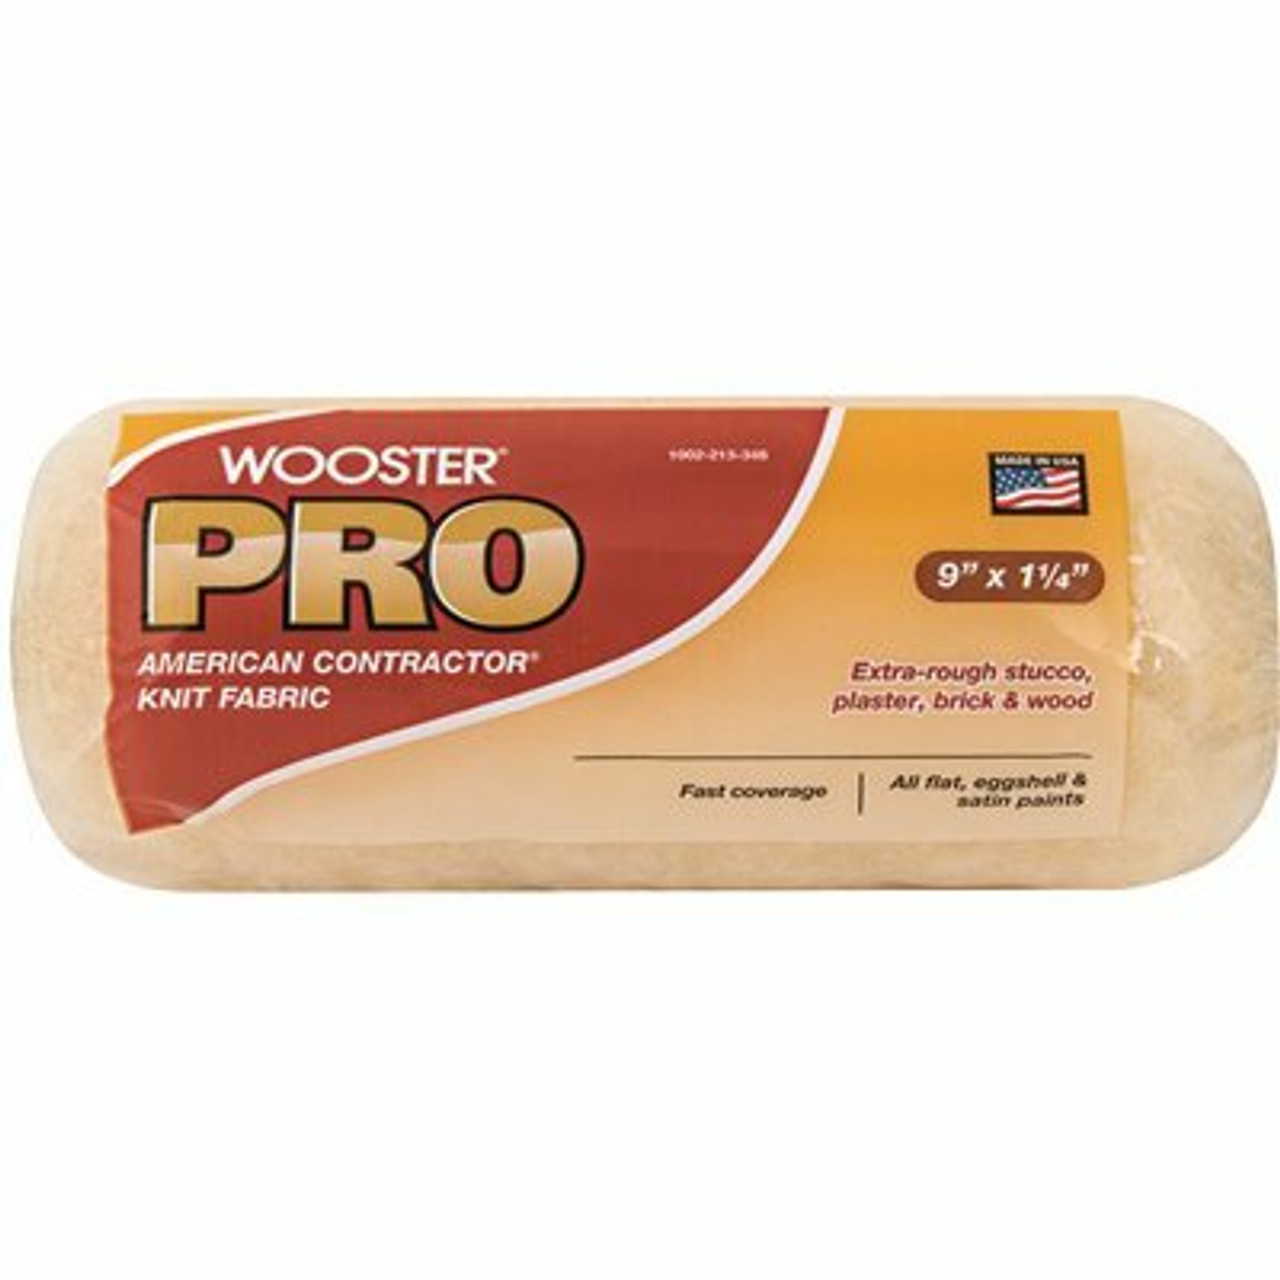 Wooster 9 In. X 1-1/4 In. Pro American Contractor High-Density Knit Fabric Roller